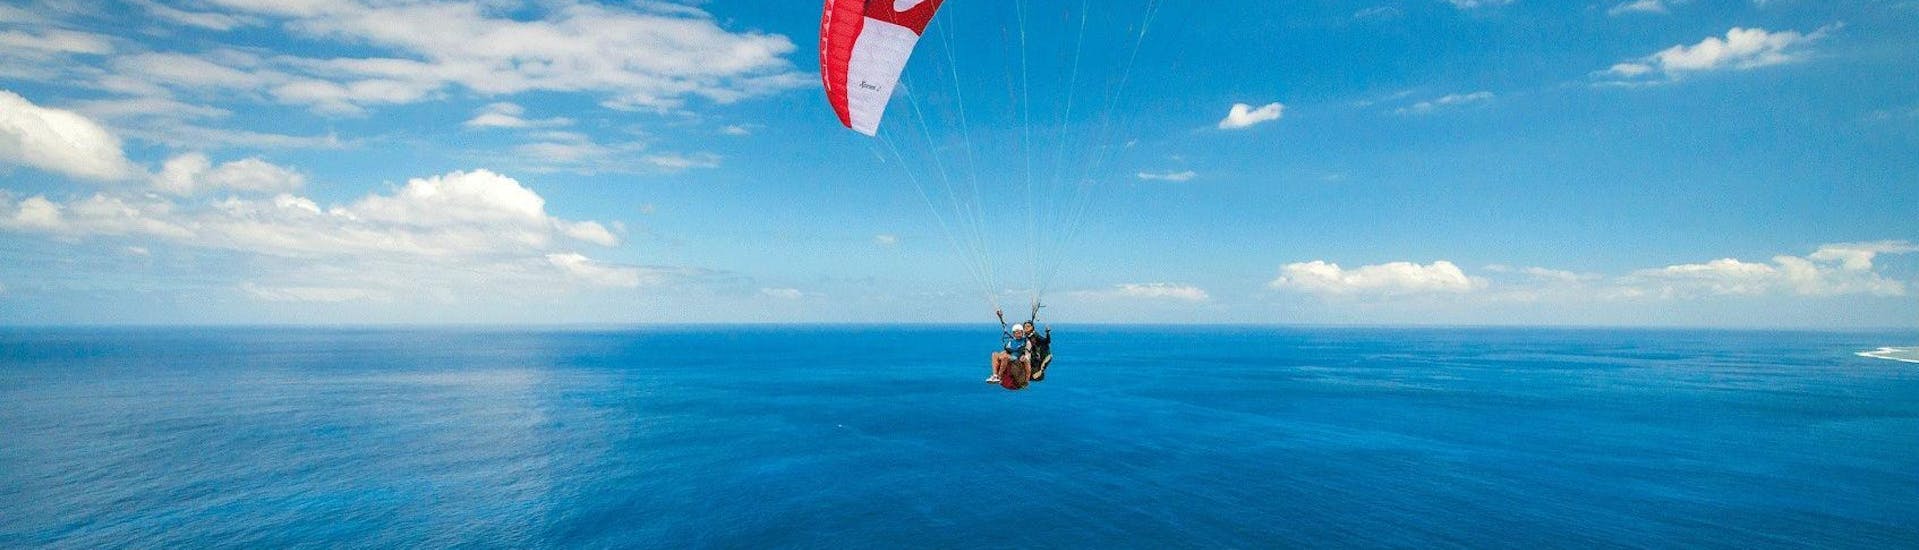 A paraglider pilot from Addict Parapente is flying over the Bay of St Leu during a Tandem Paragliding Flight "Performance".